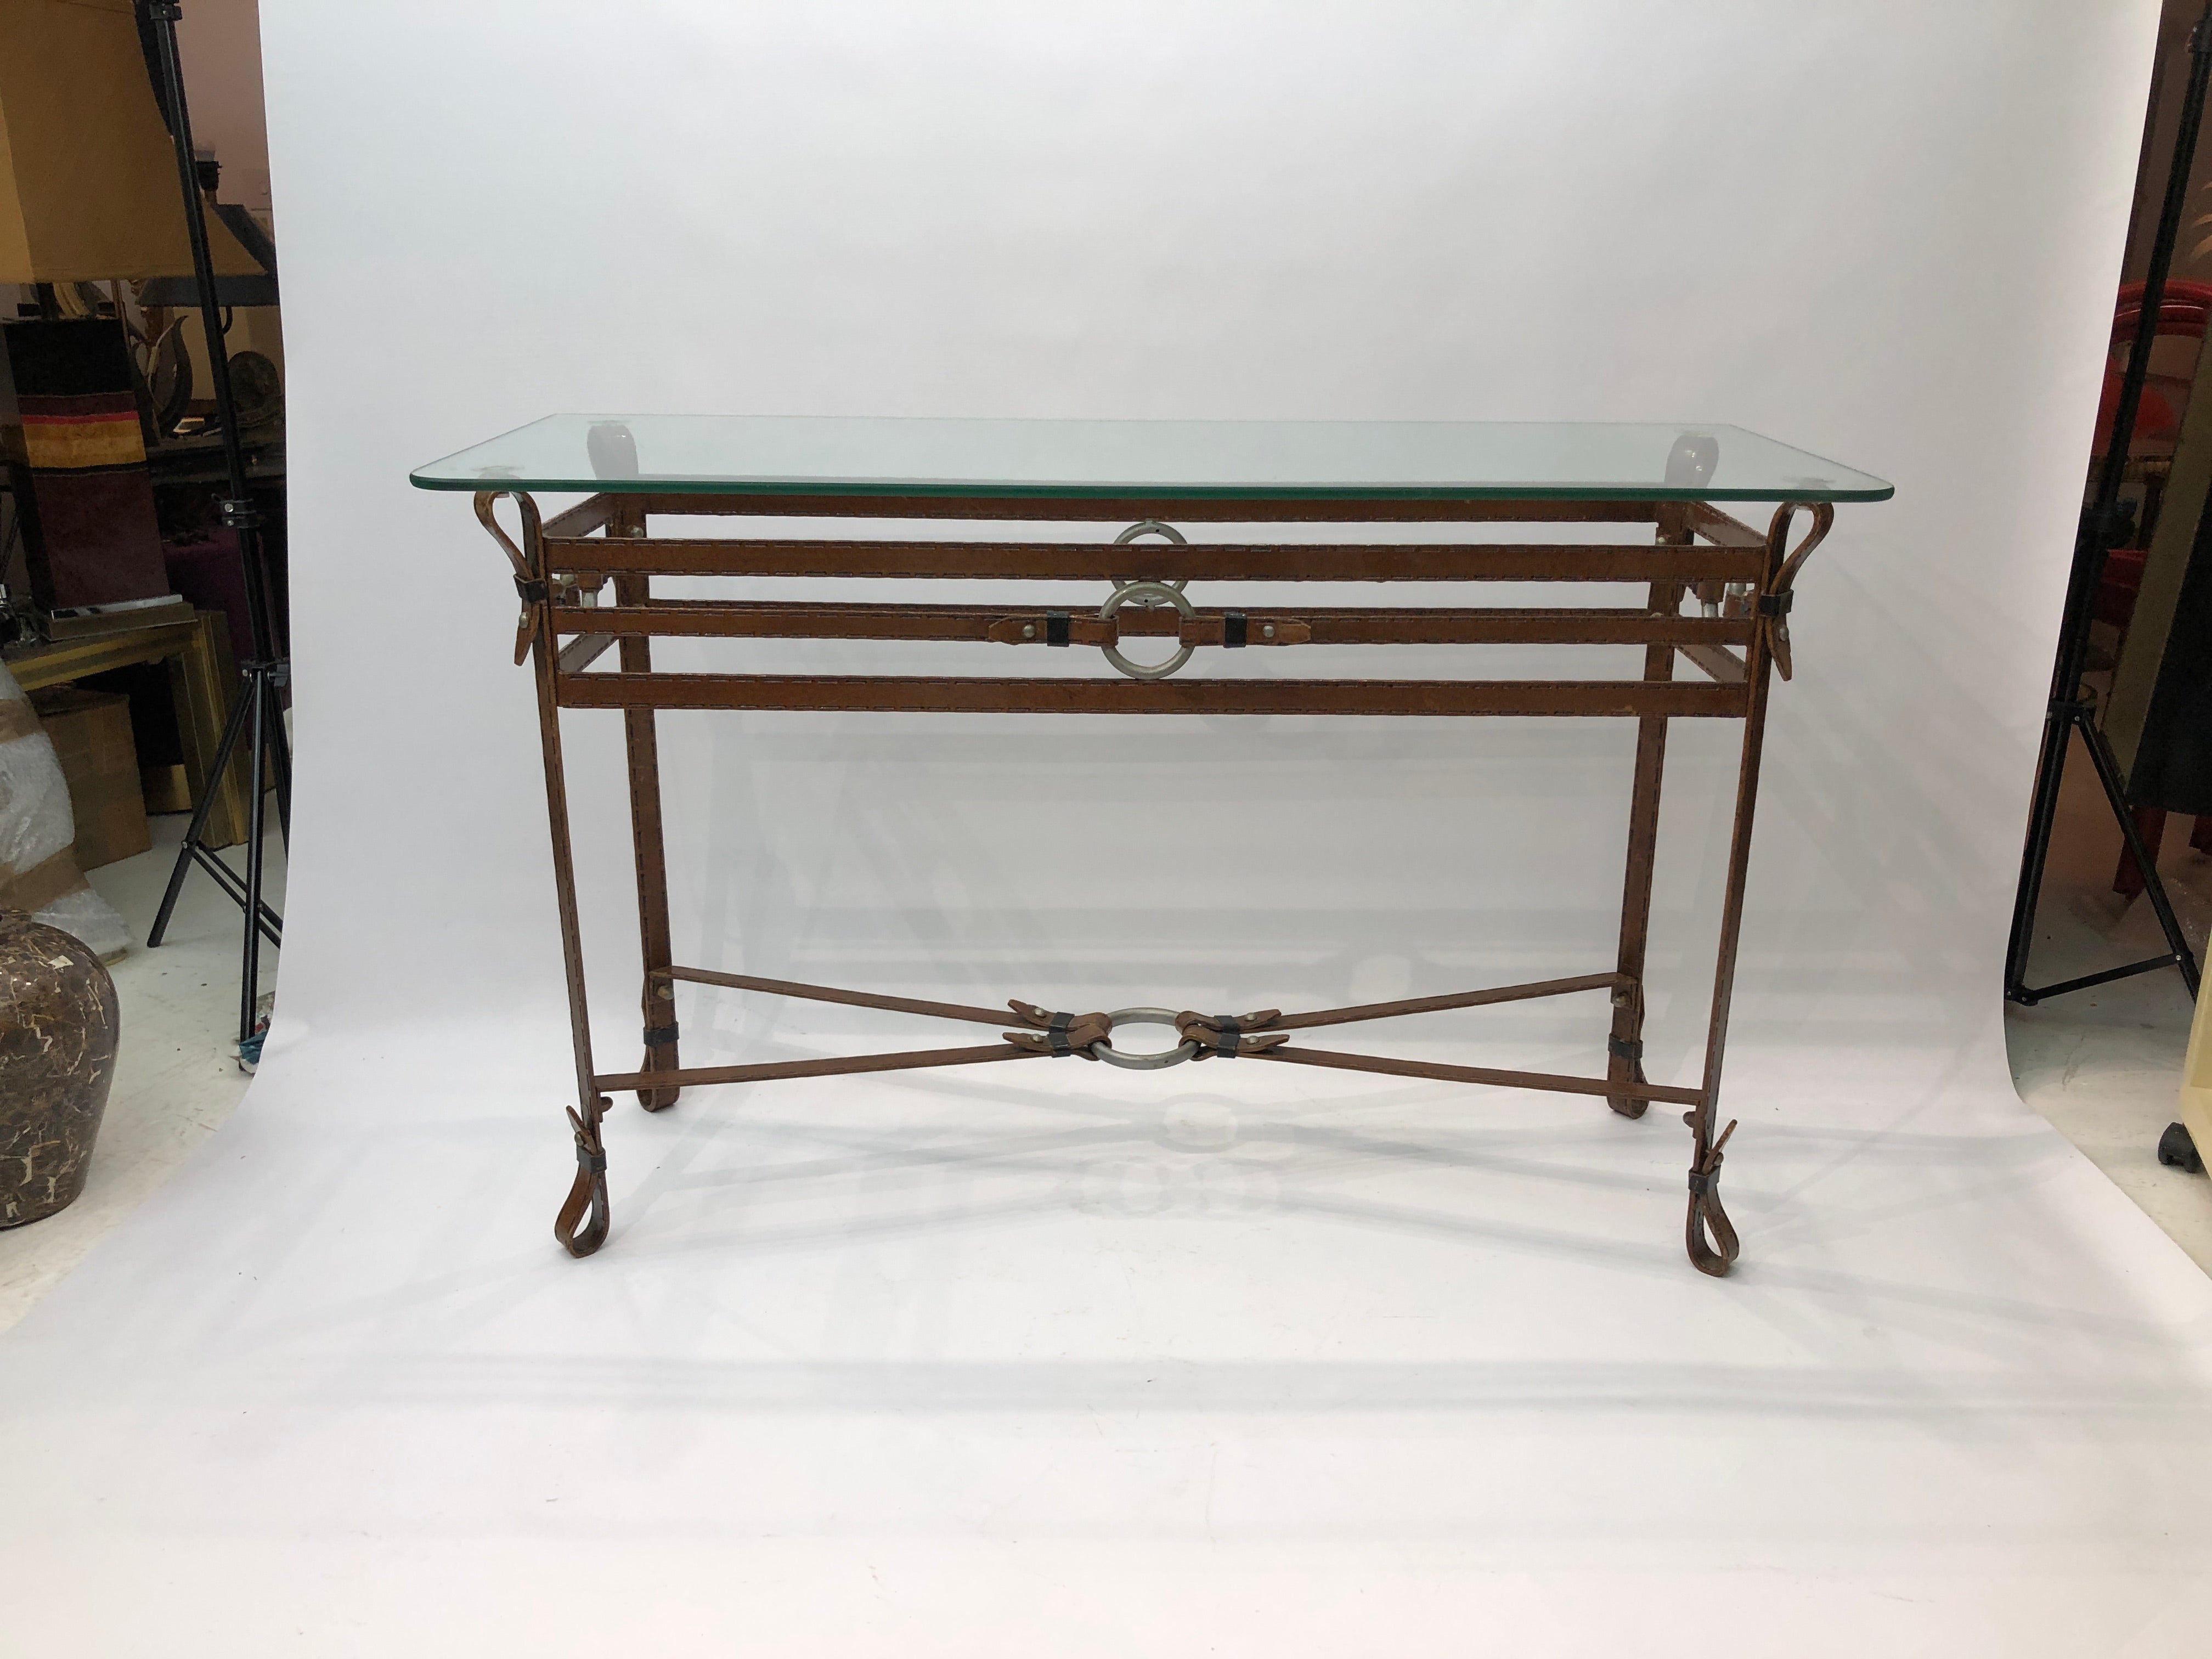 Iron frame console table inspired by Jacque Adnet leather and stitch designs.
This console table represents brown leather stitched straps that are joined by iron rings and they form a pleasing design that supports the glass top. 
The glass top has